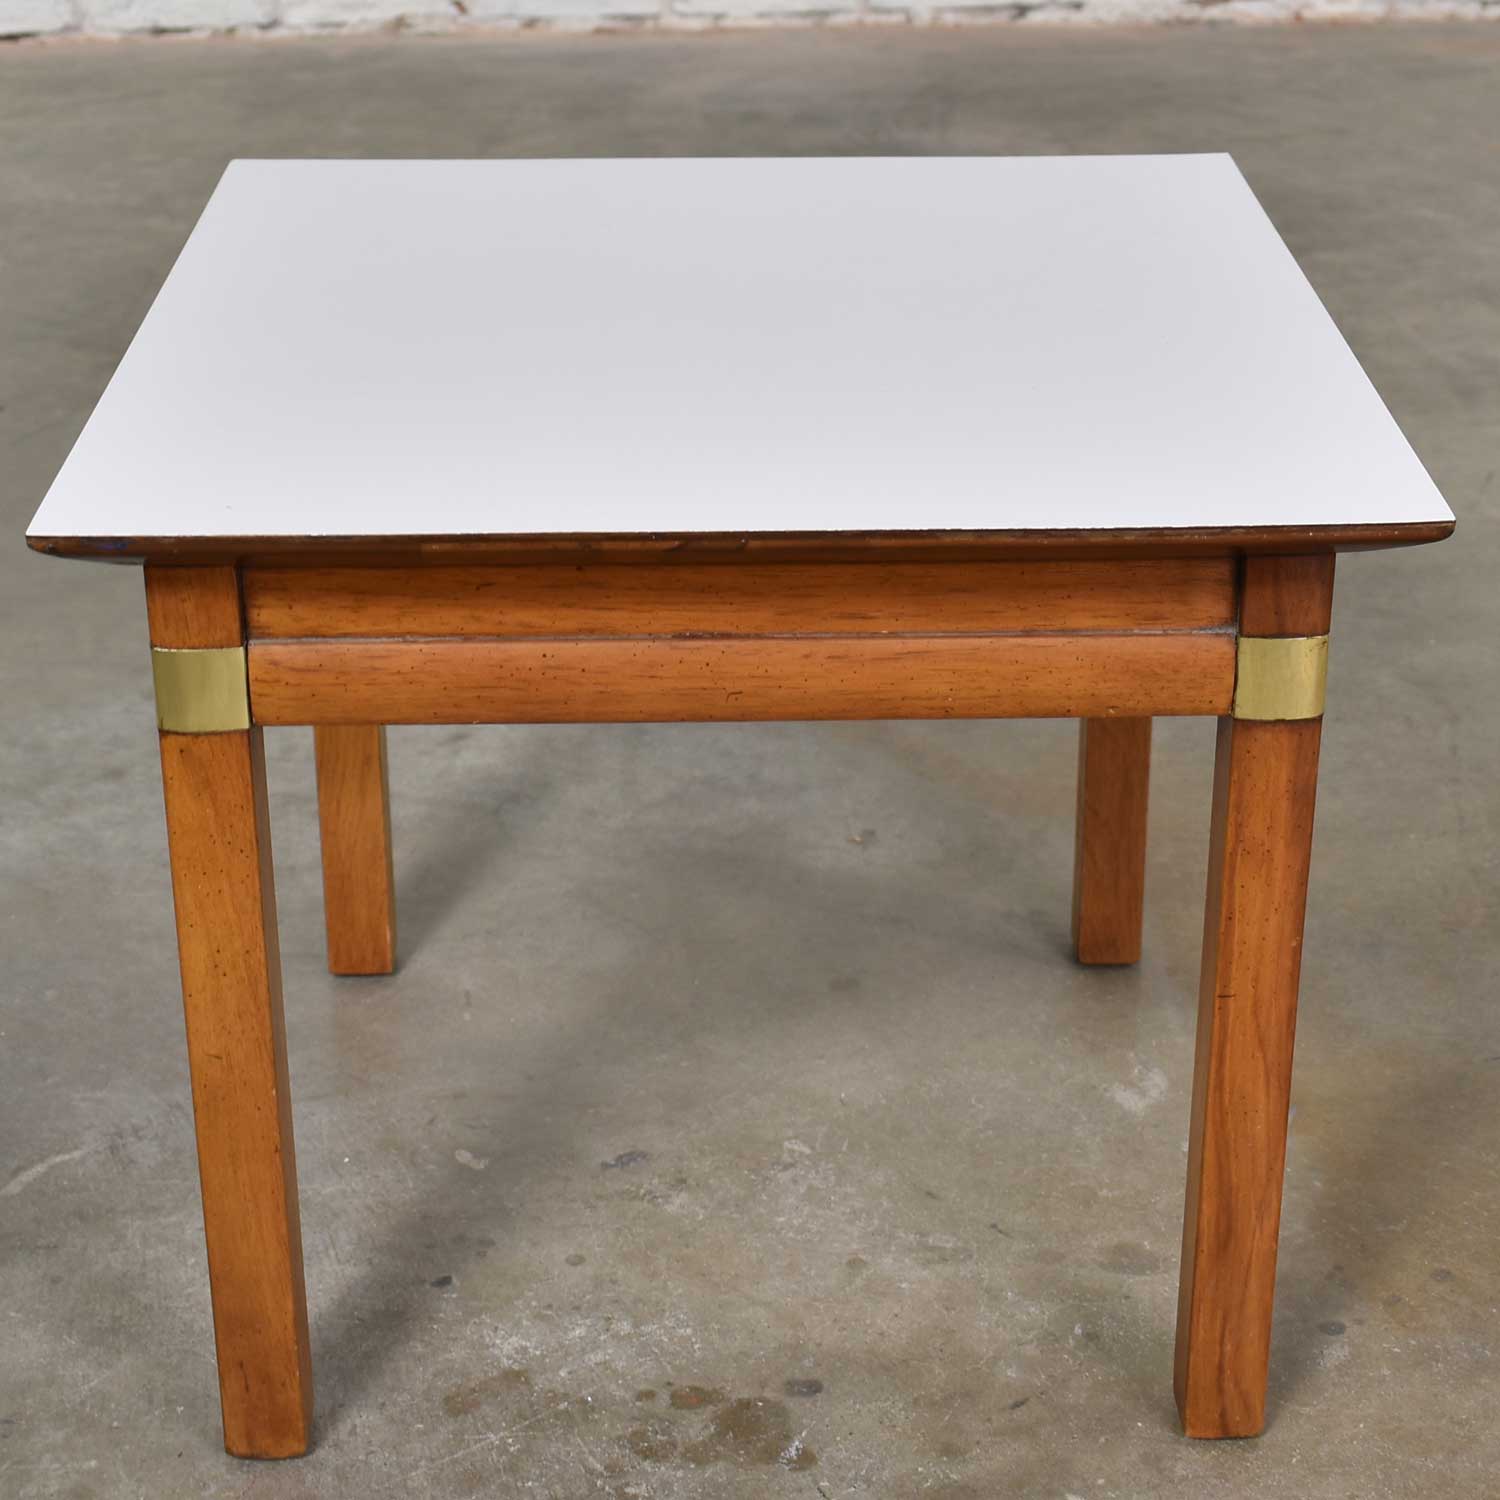 Campaign Style Square Side Table with White Laminate Top by Hickory Furniture Mfg.